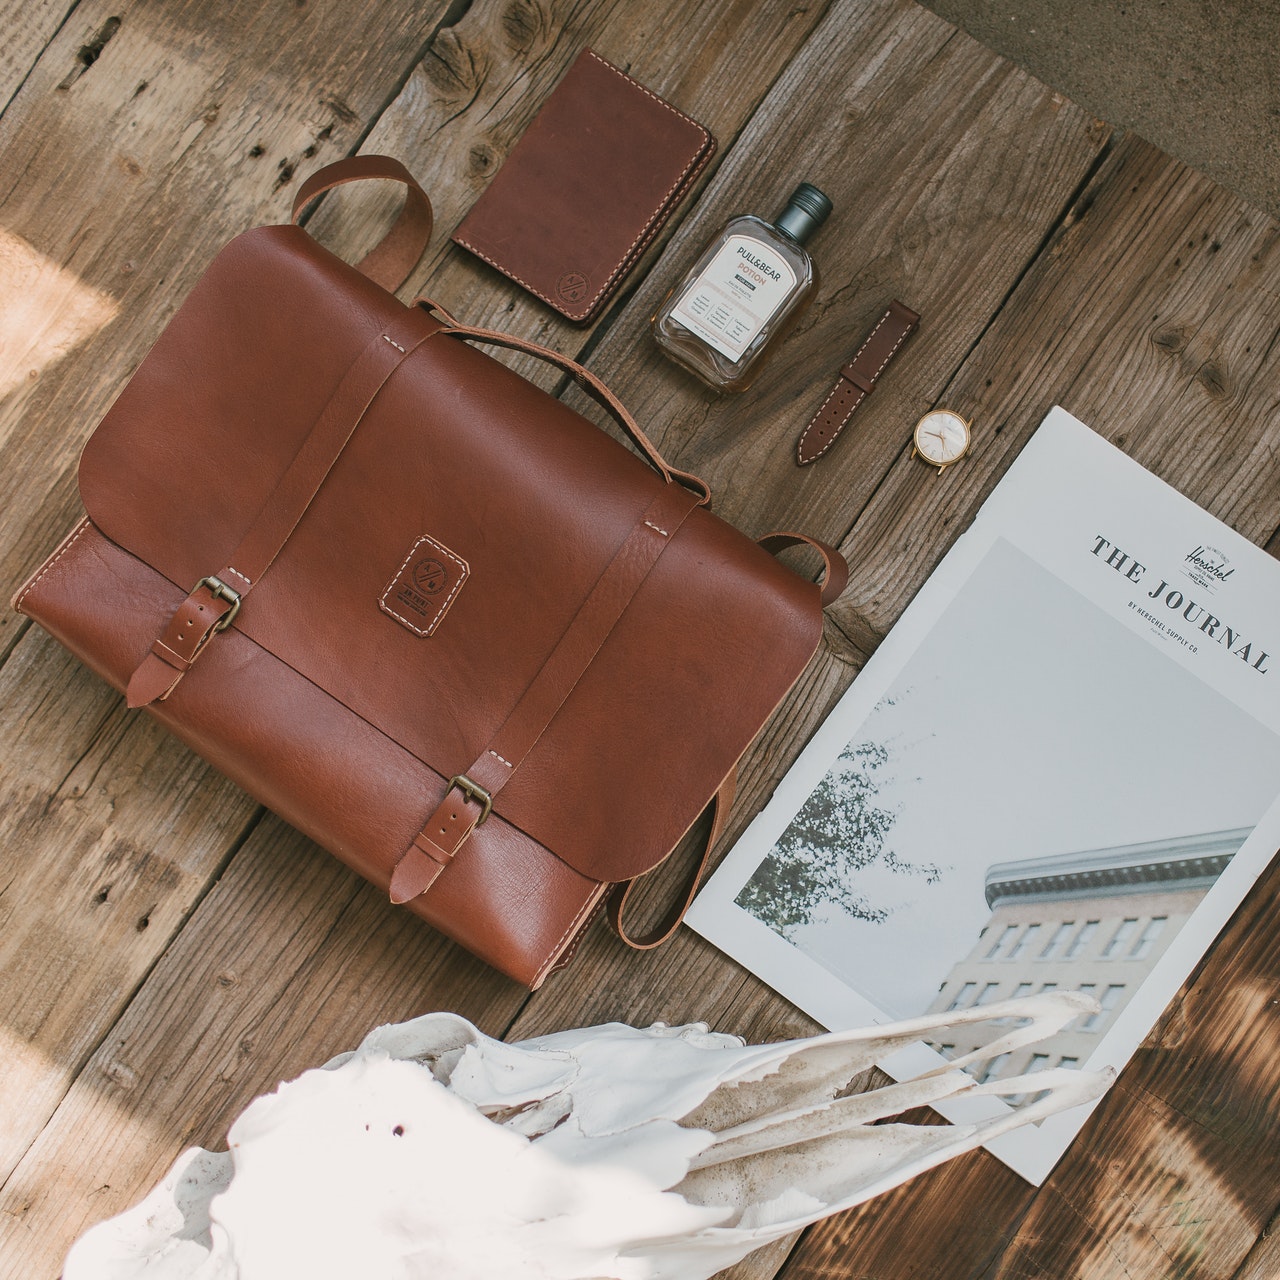 A leather bag, wallet, and magazine on a wooden table